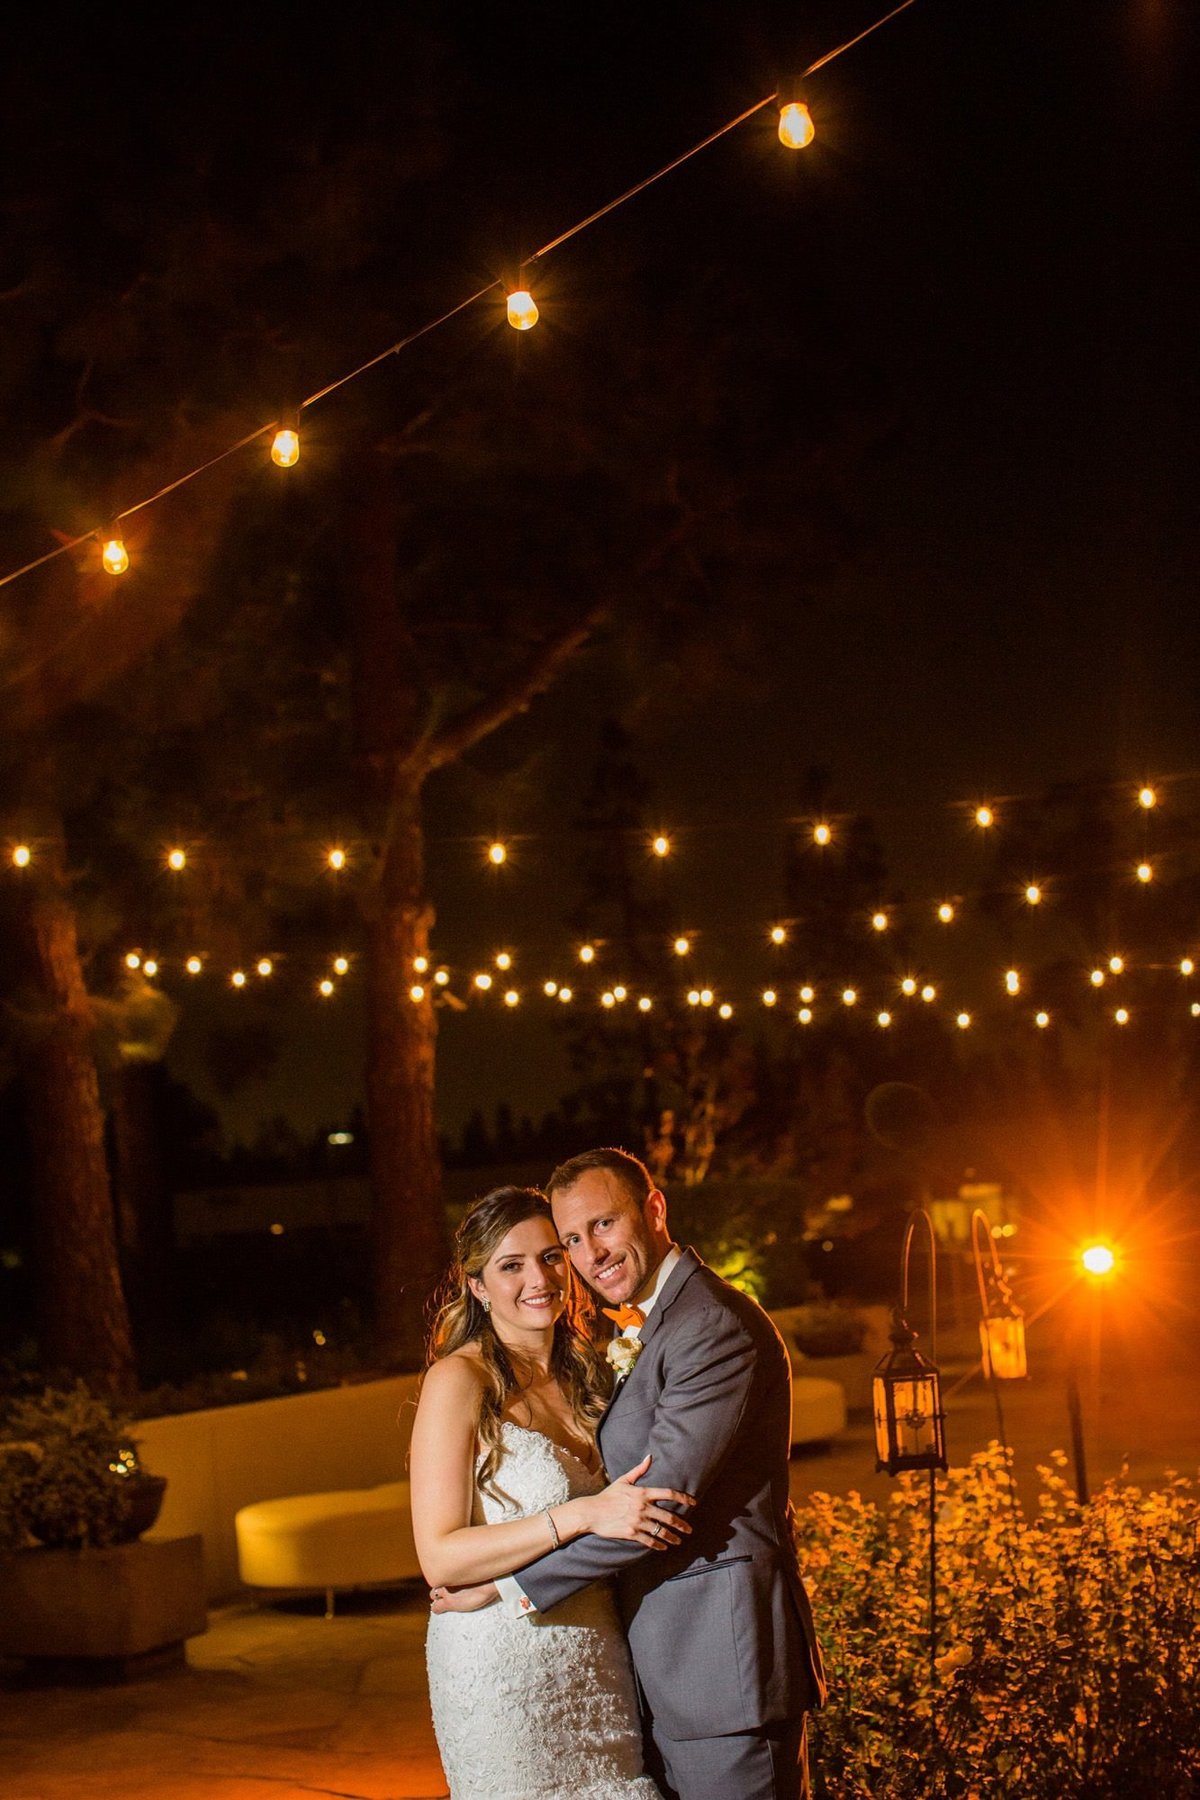 Bride and Groom pose cheek to cheek at night under the lights